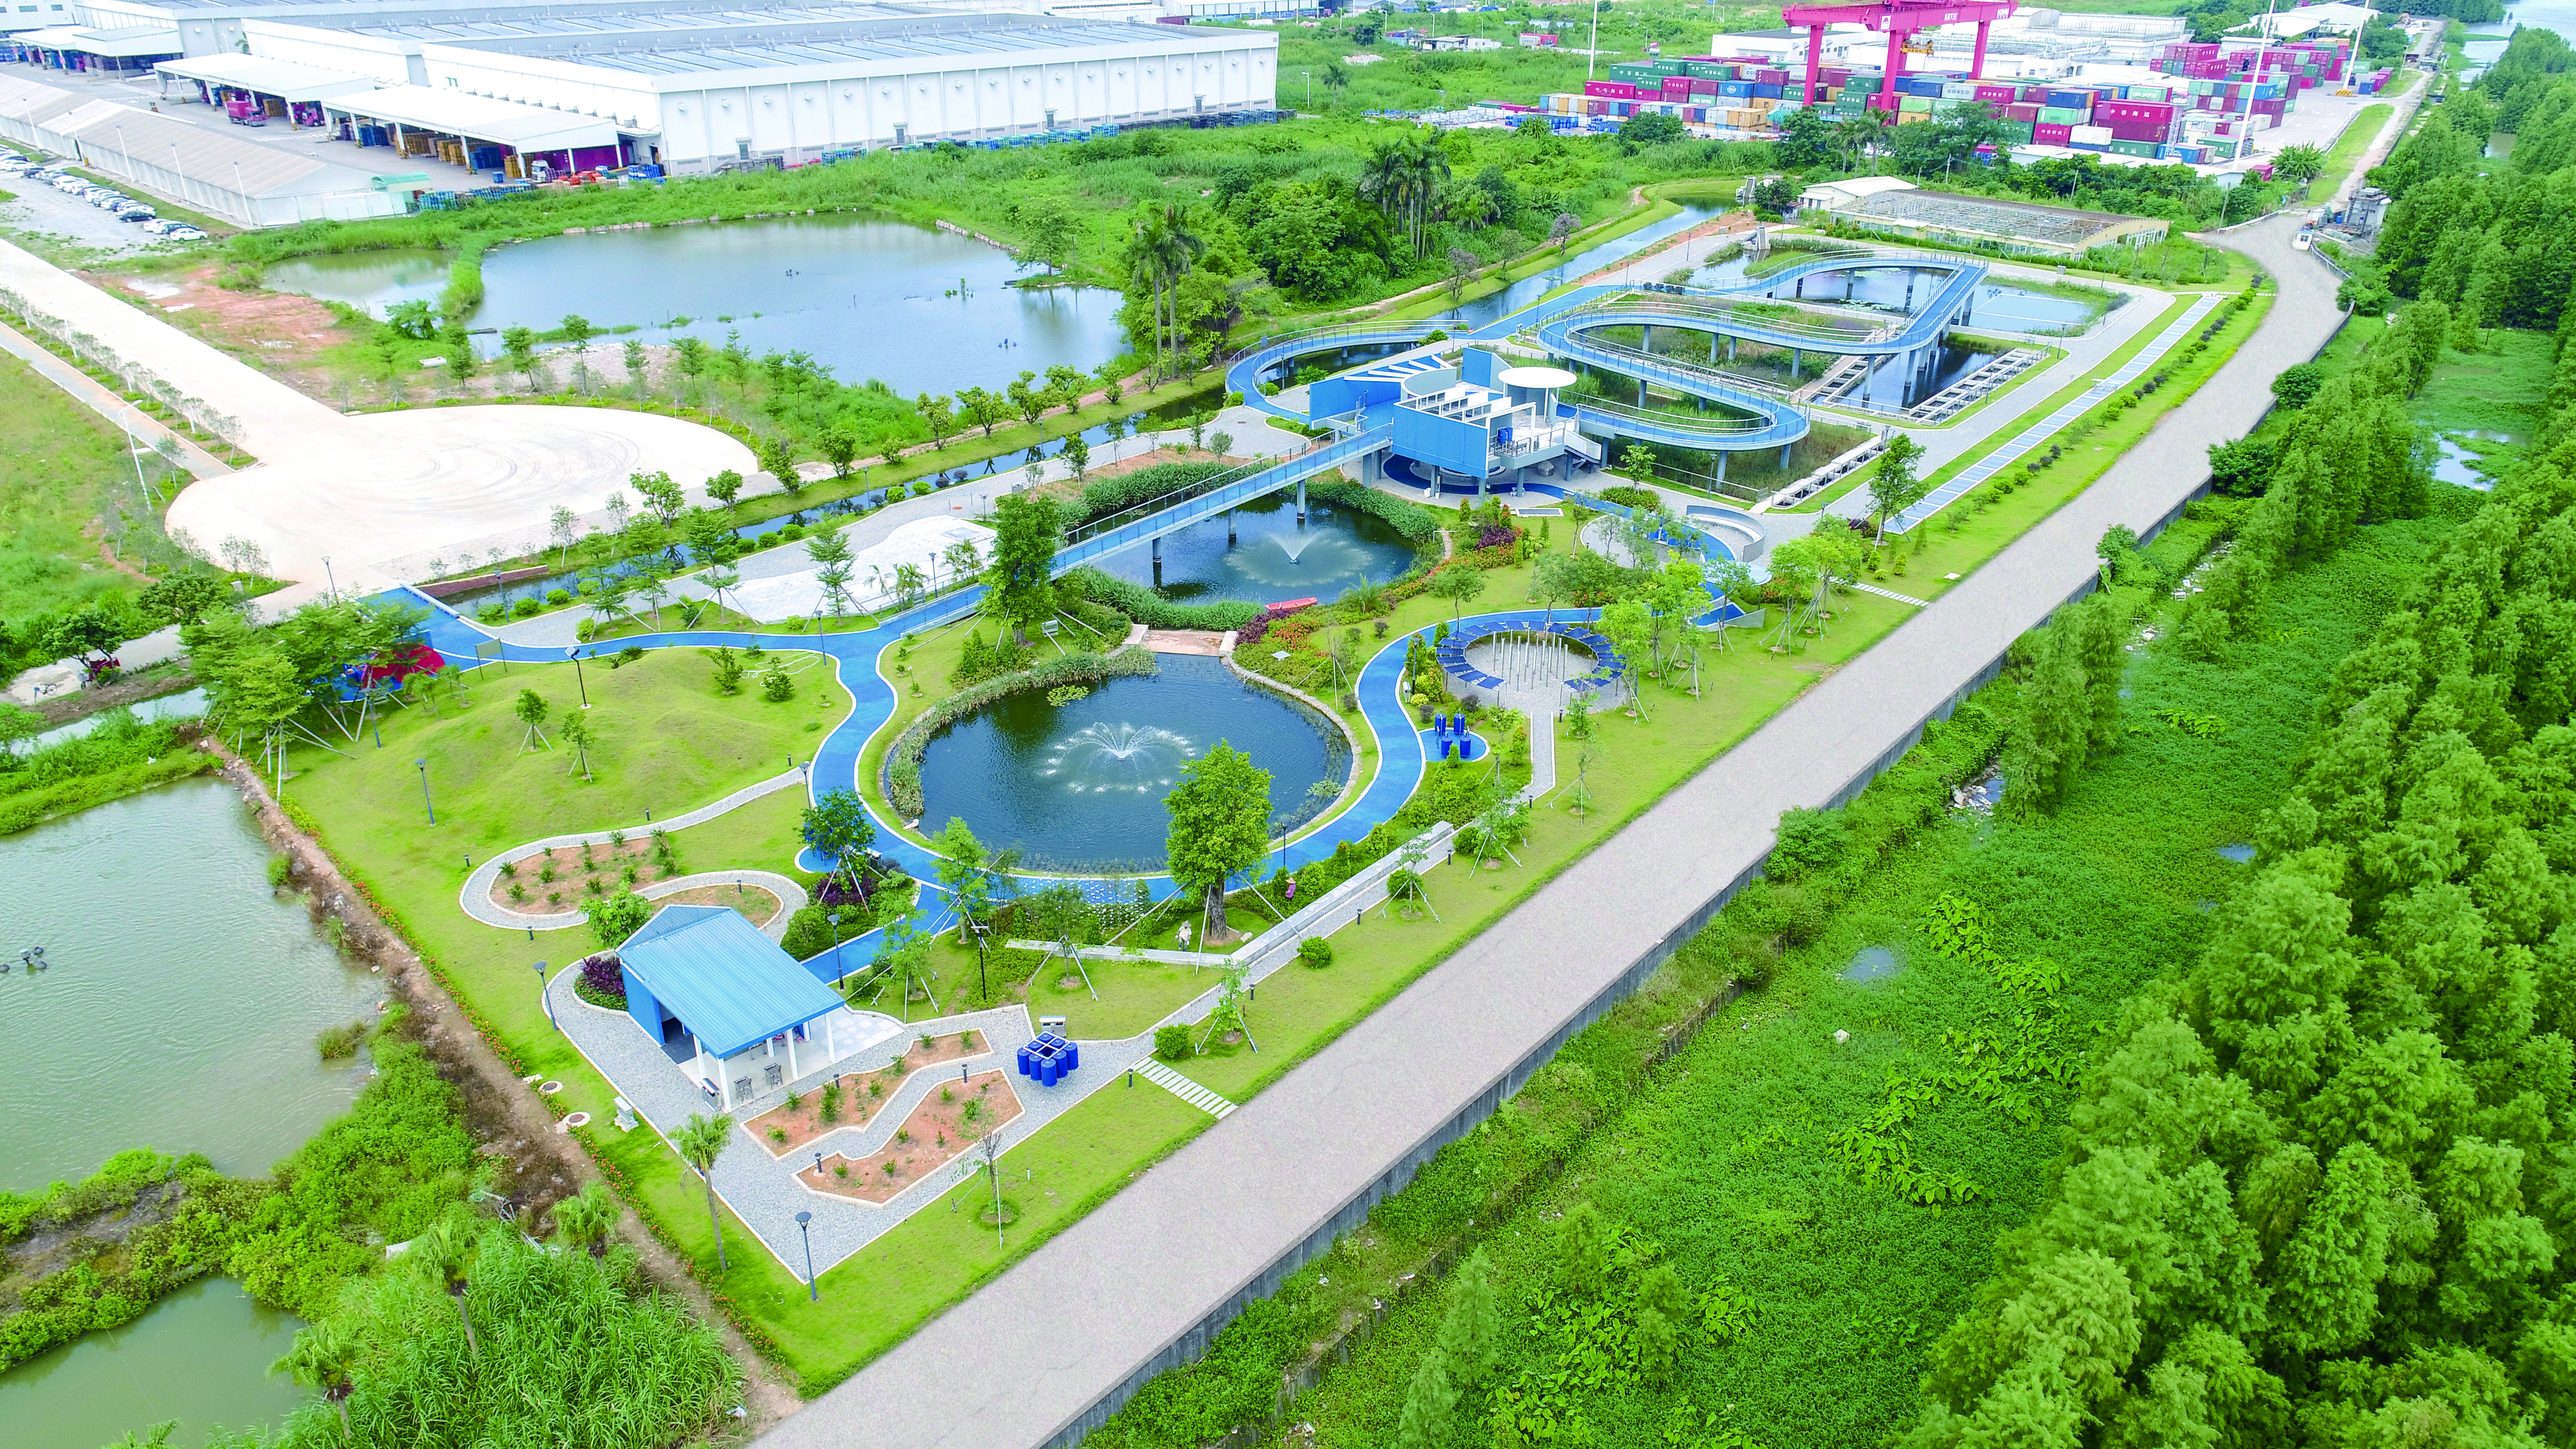 Opening of Man-made Wetland Park in Xinhui Production Base